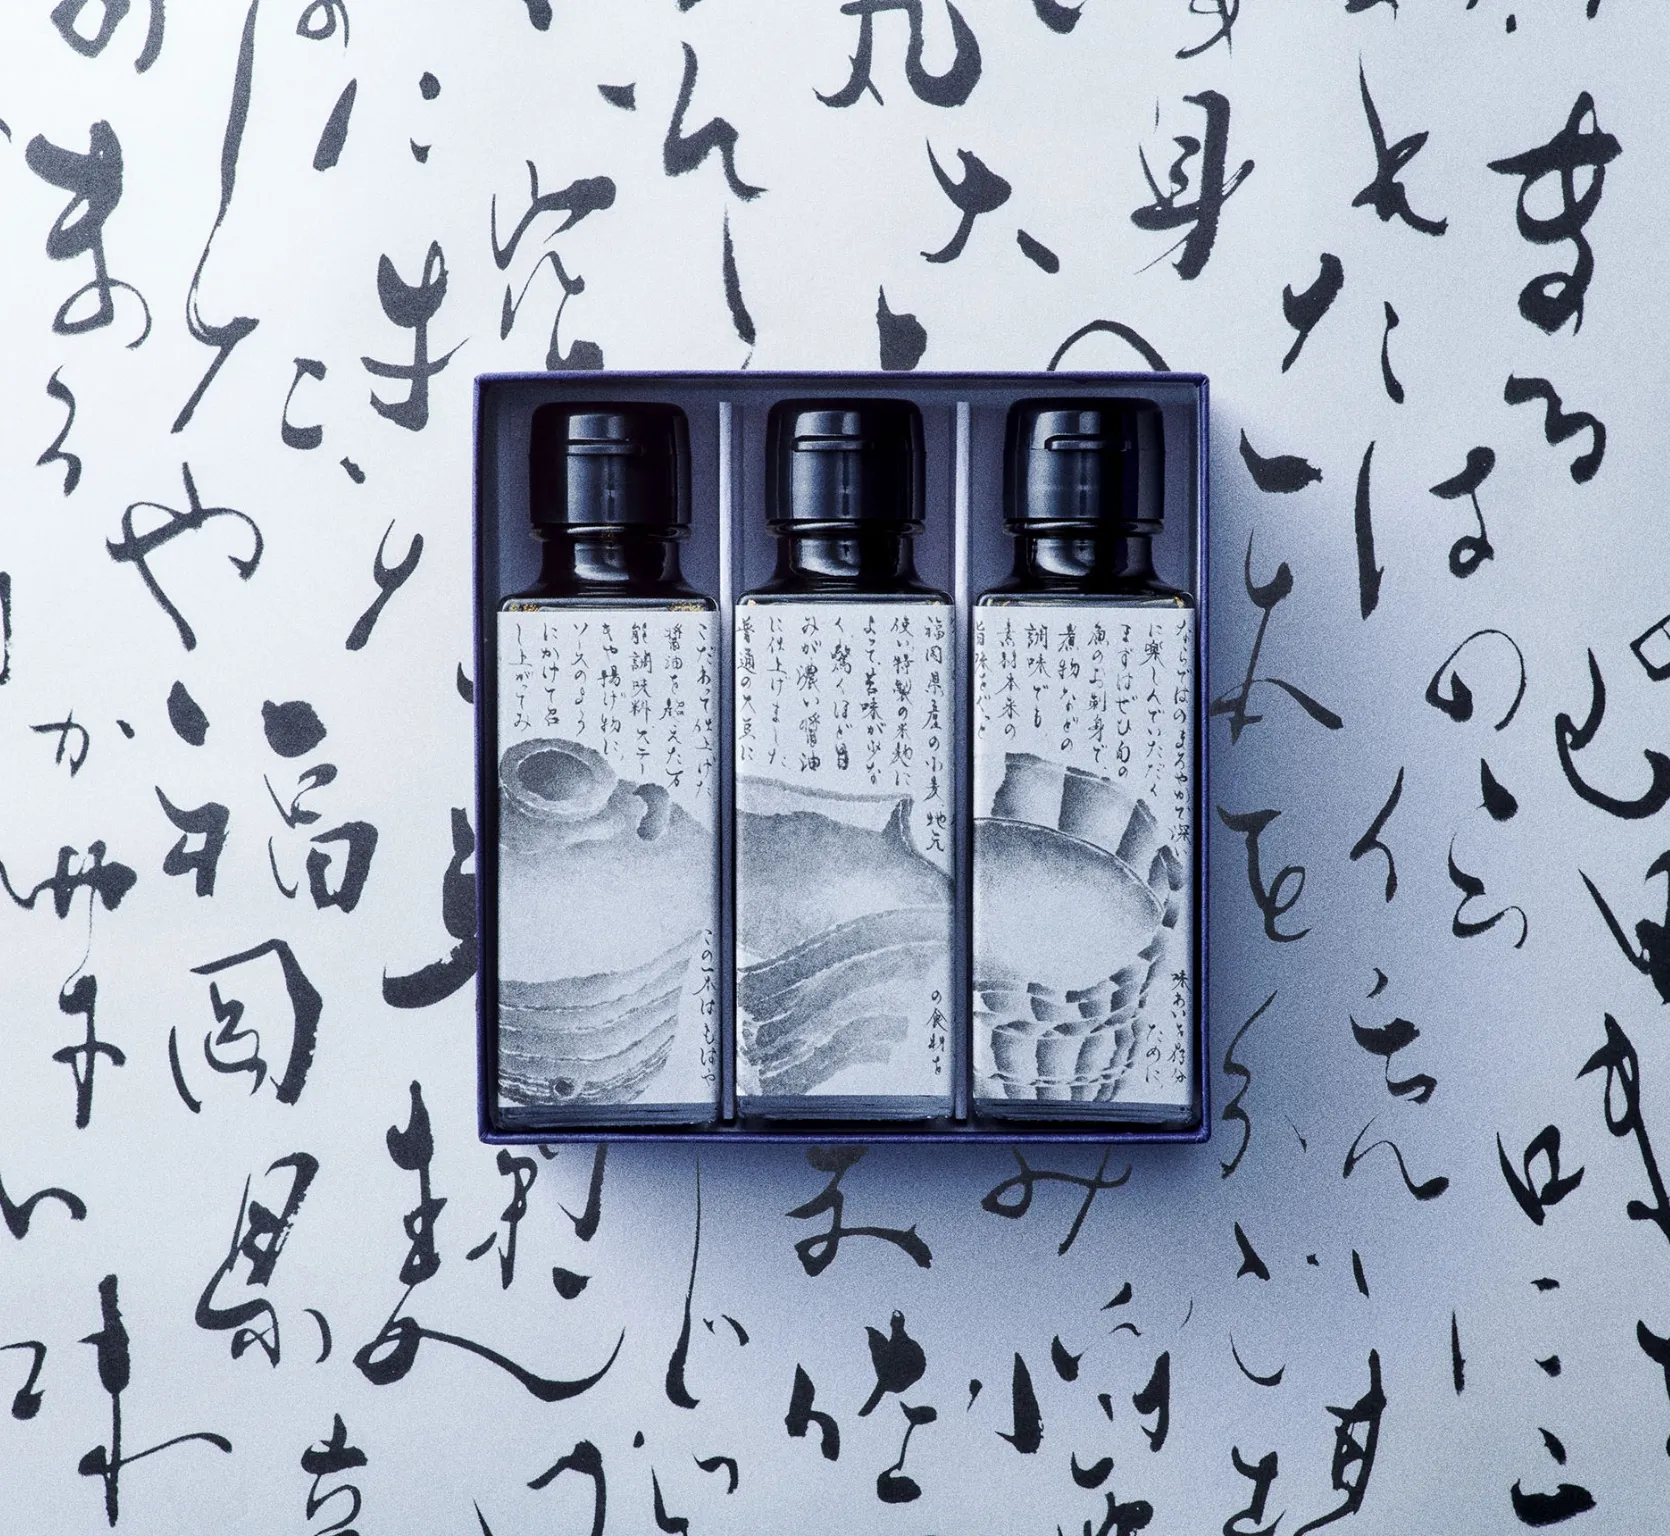 Maruha syoyu Soy sauce for gifts package design